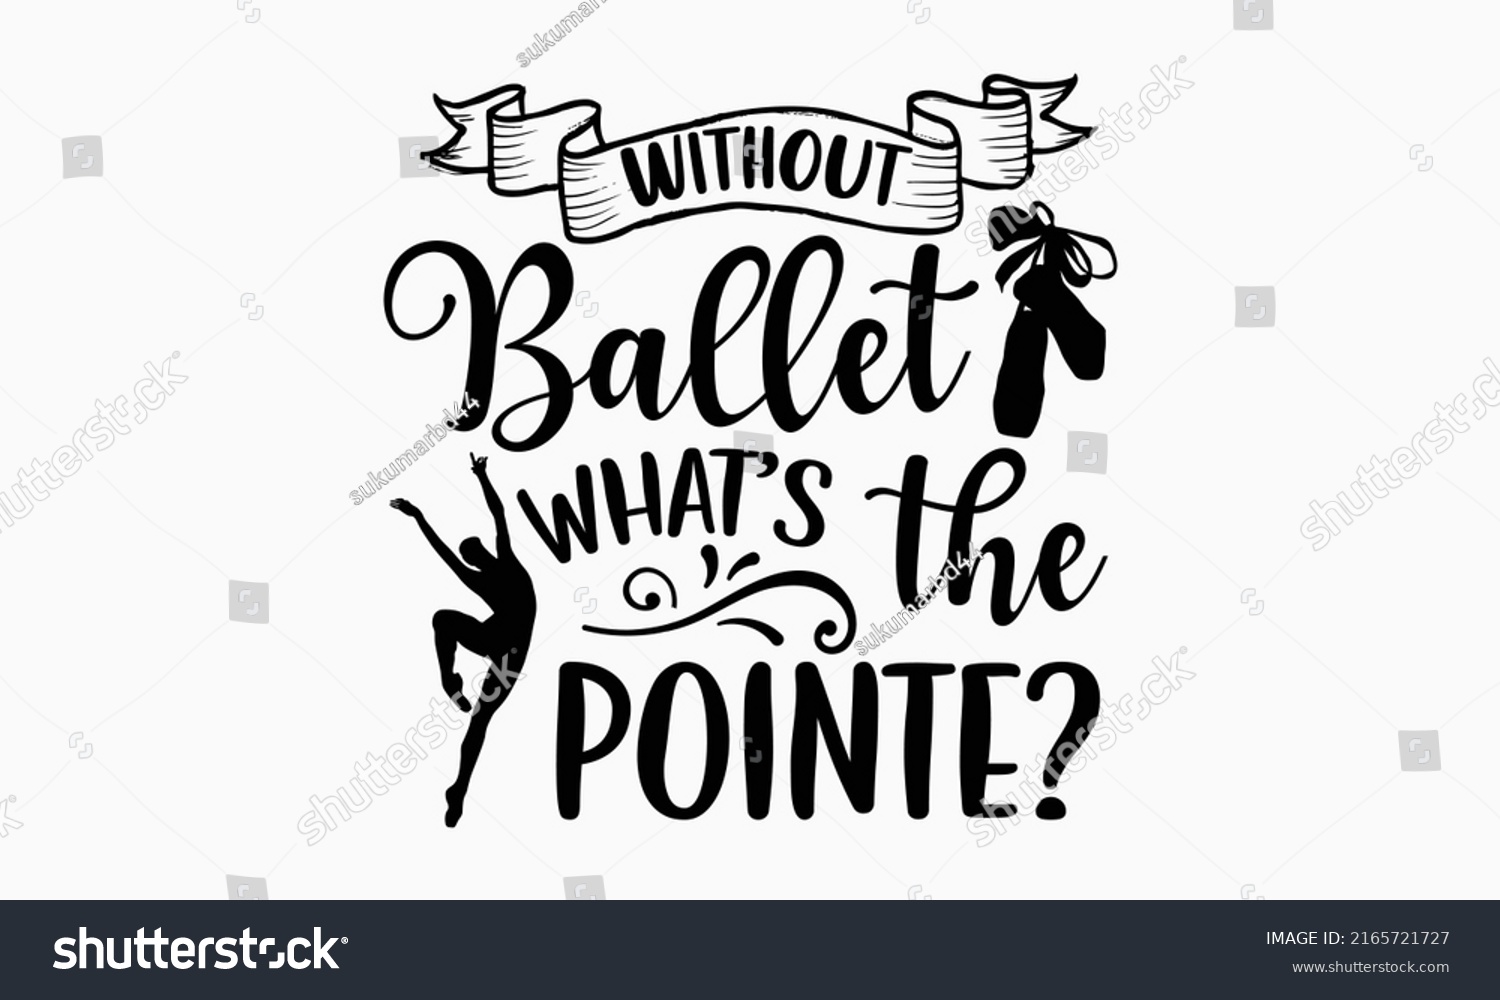 SVG of Without ballet what’s the pointe? - Ballet t shirt design, Hand drawn lettering phrase, Calligraphy graphic design, SVG Files for Cutting Cricut and Silhouette svg